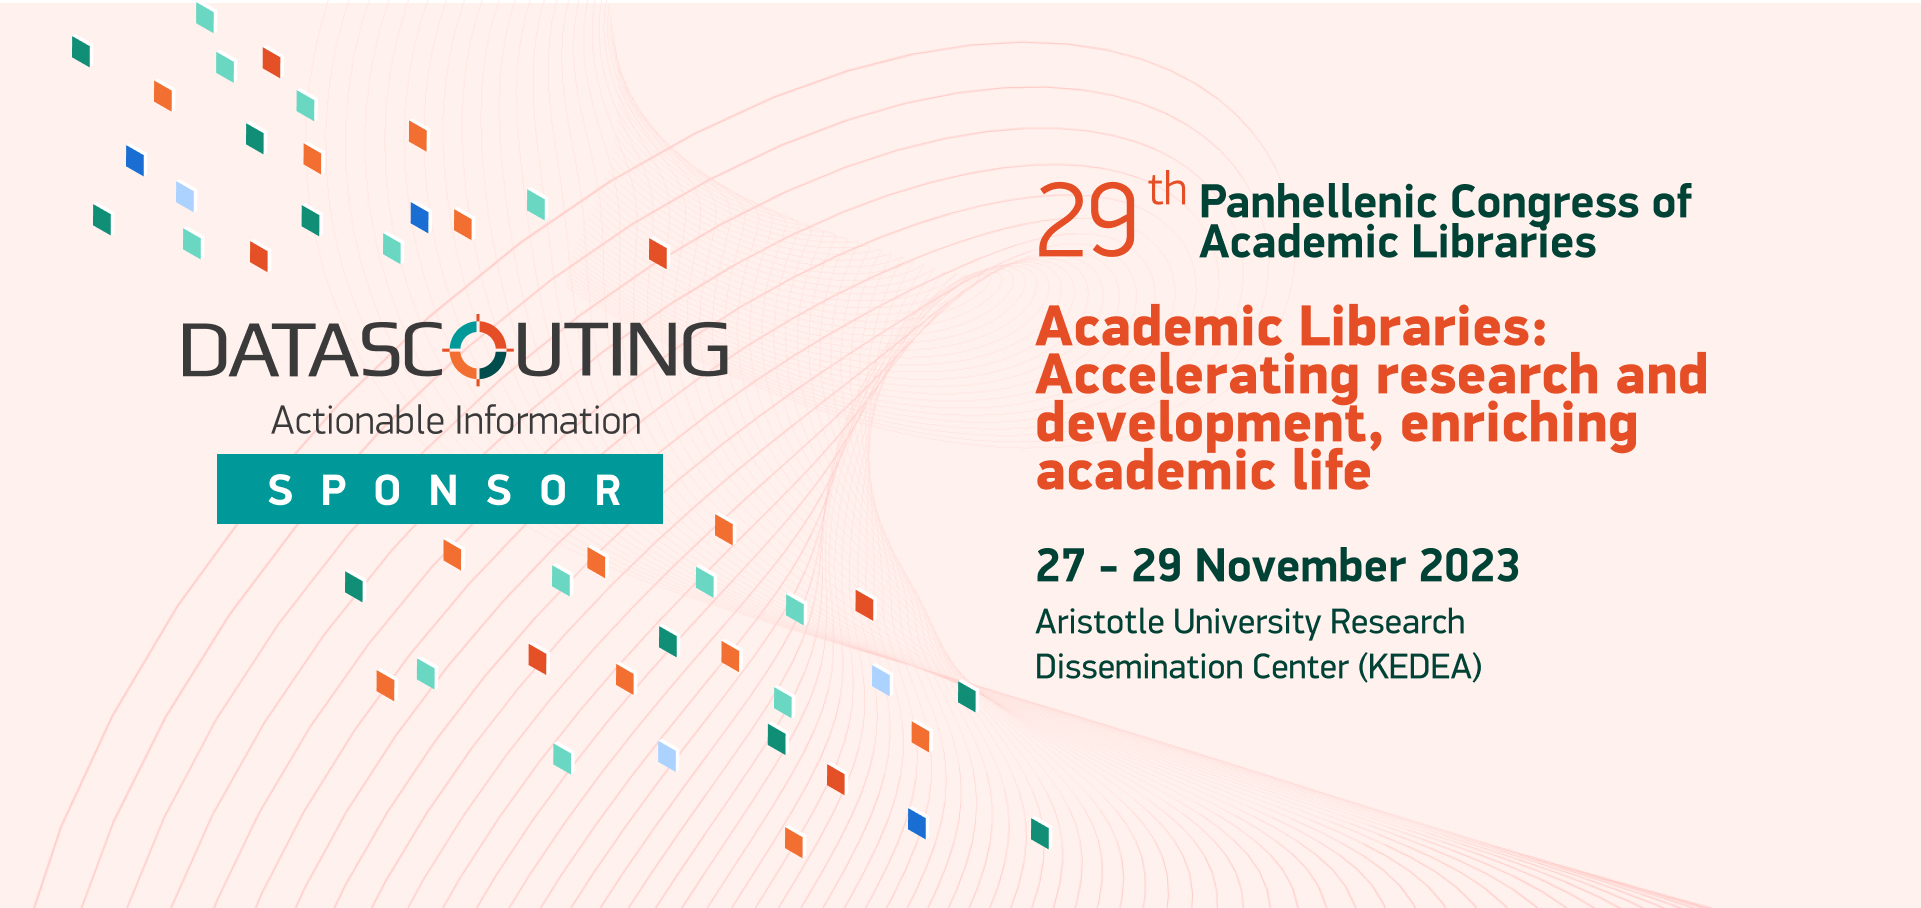 29th Panhellenic Congress of Academic Libraries: Sponsor and Exhibitor _DataScouting